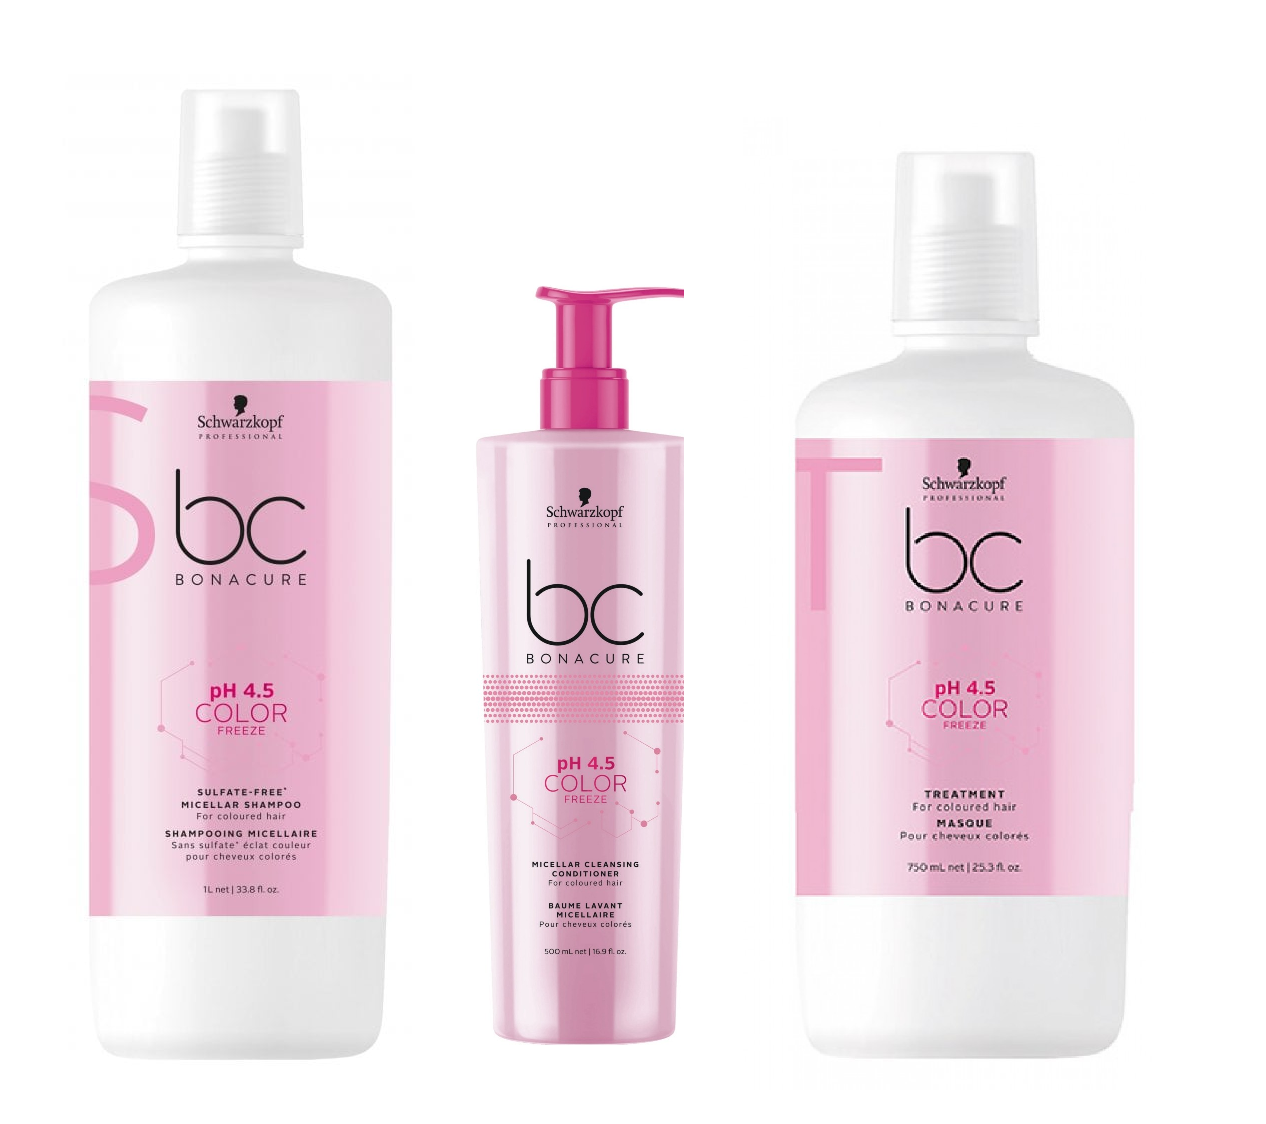 Schwarzkopf Bonacure pH 4.5 Color Freeze Micellar Sulfate-Free Shampoo 1000ml, Cleansing Conditioner 500ml and Treatment 750ml